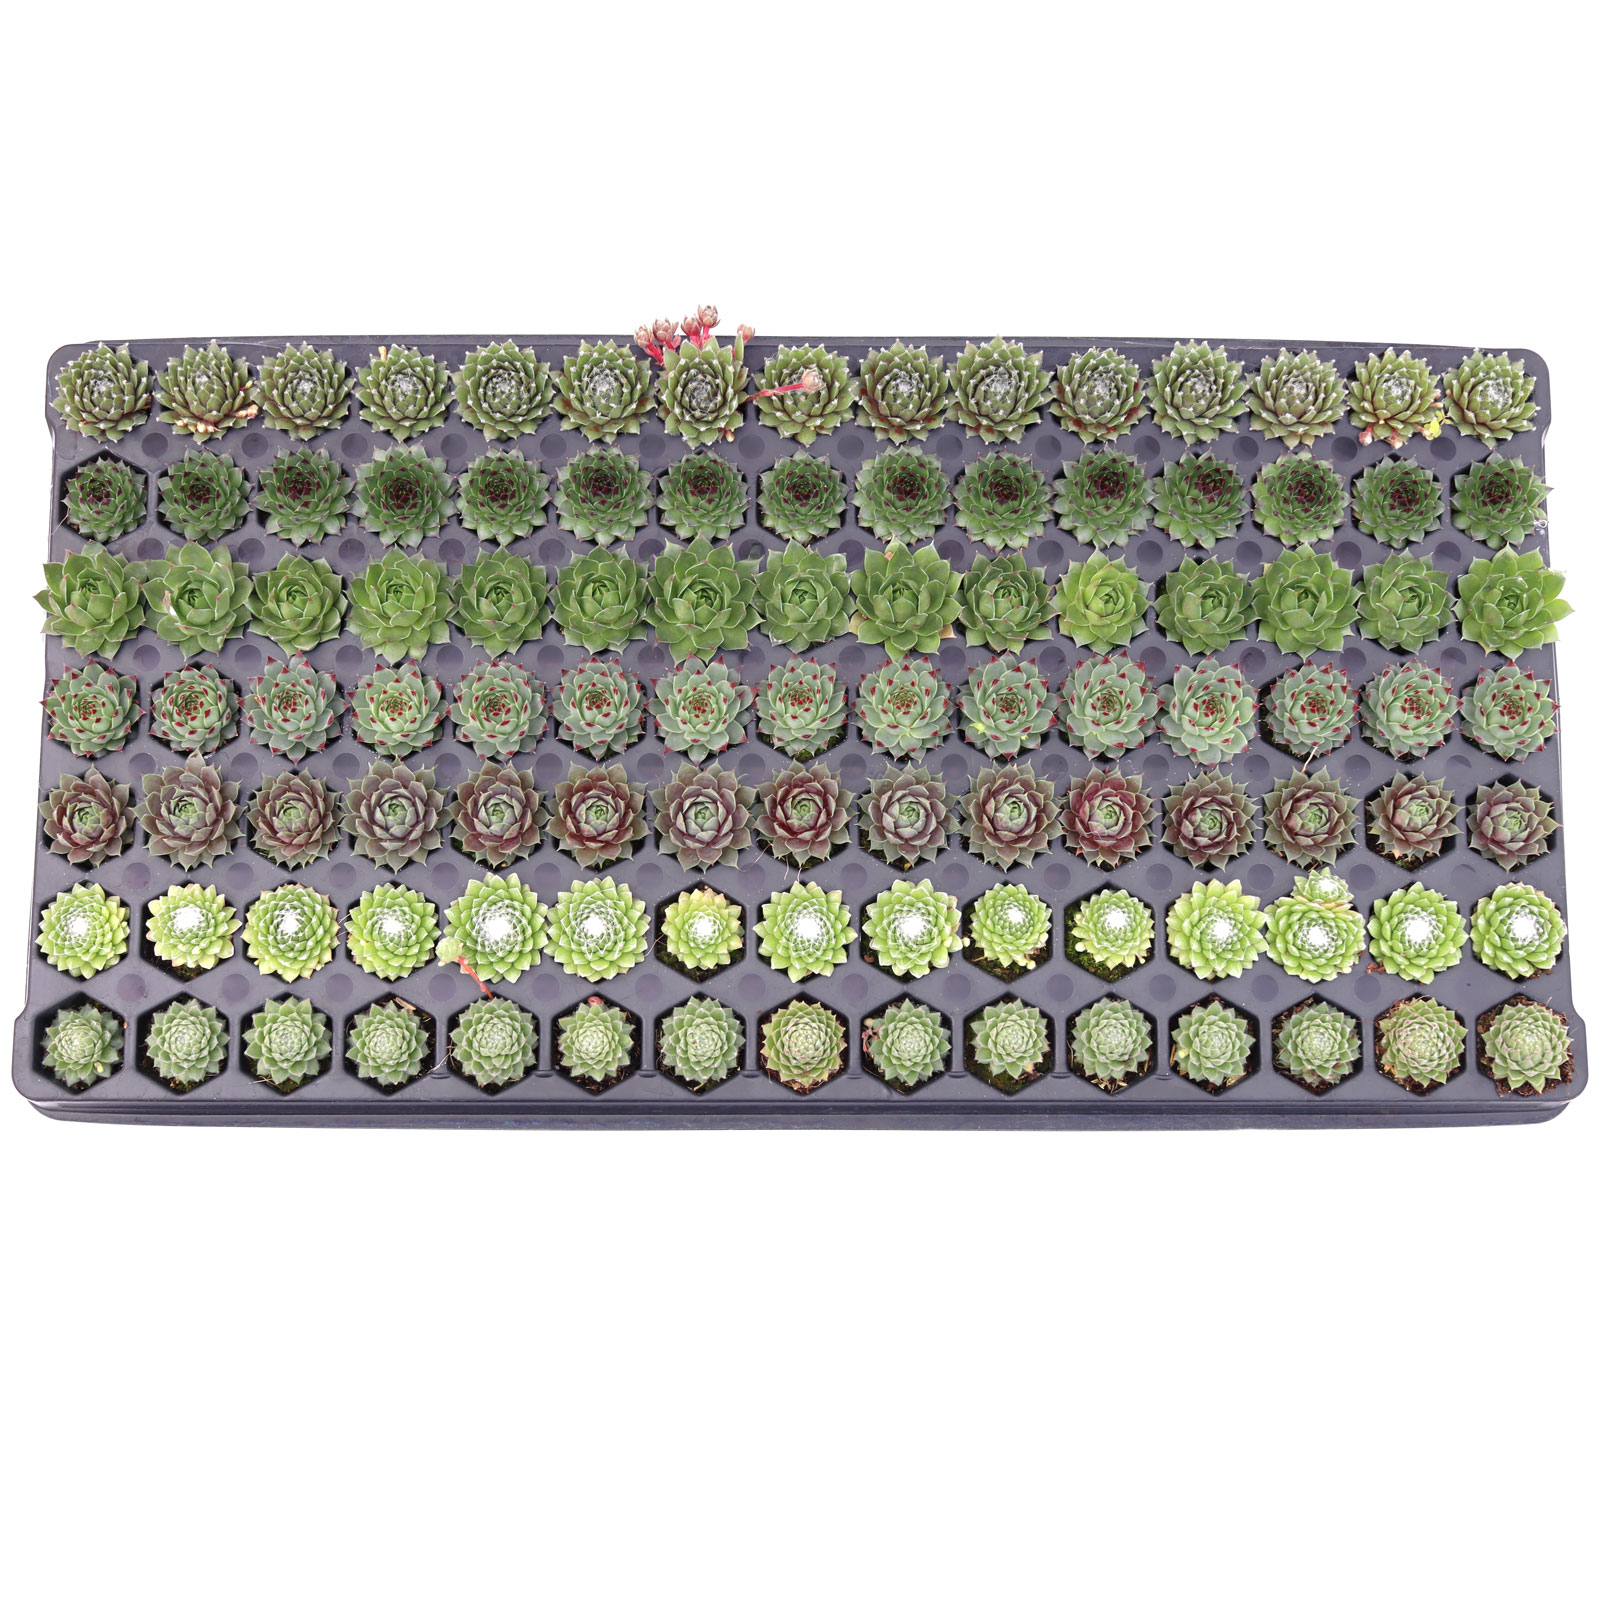 Sempervivum Bulk 105 Tray - 7 Types w/ ID - 1.2in Plugs Questions & Answers